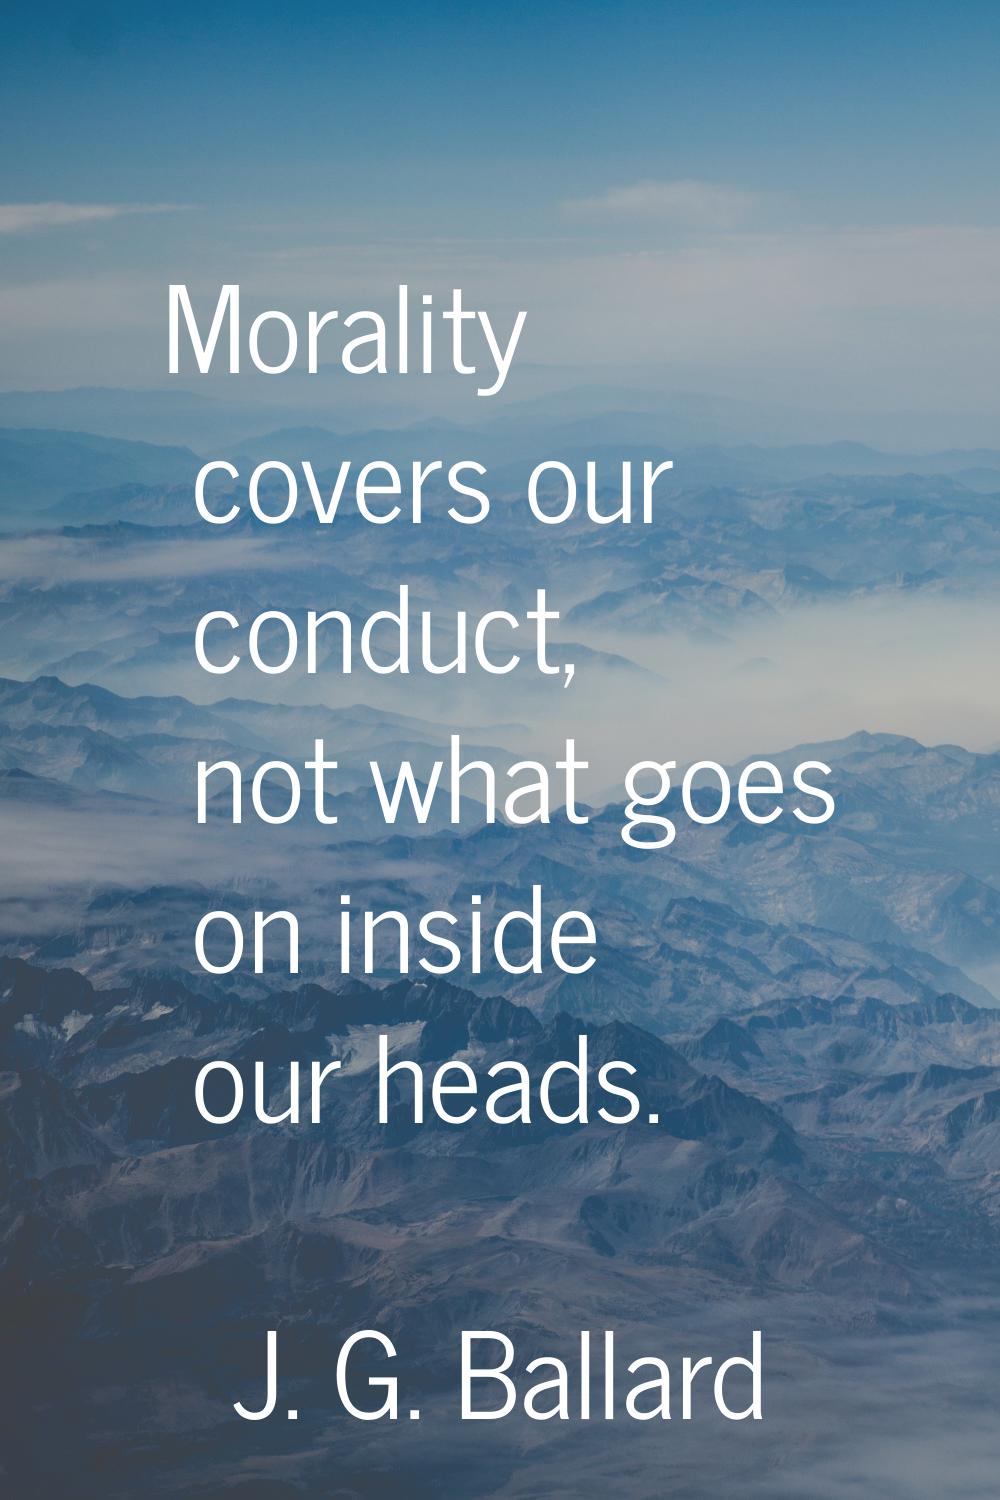 Morality covers our conduct, not what goes on inside our heads.